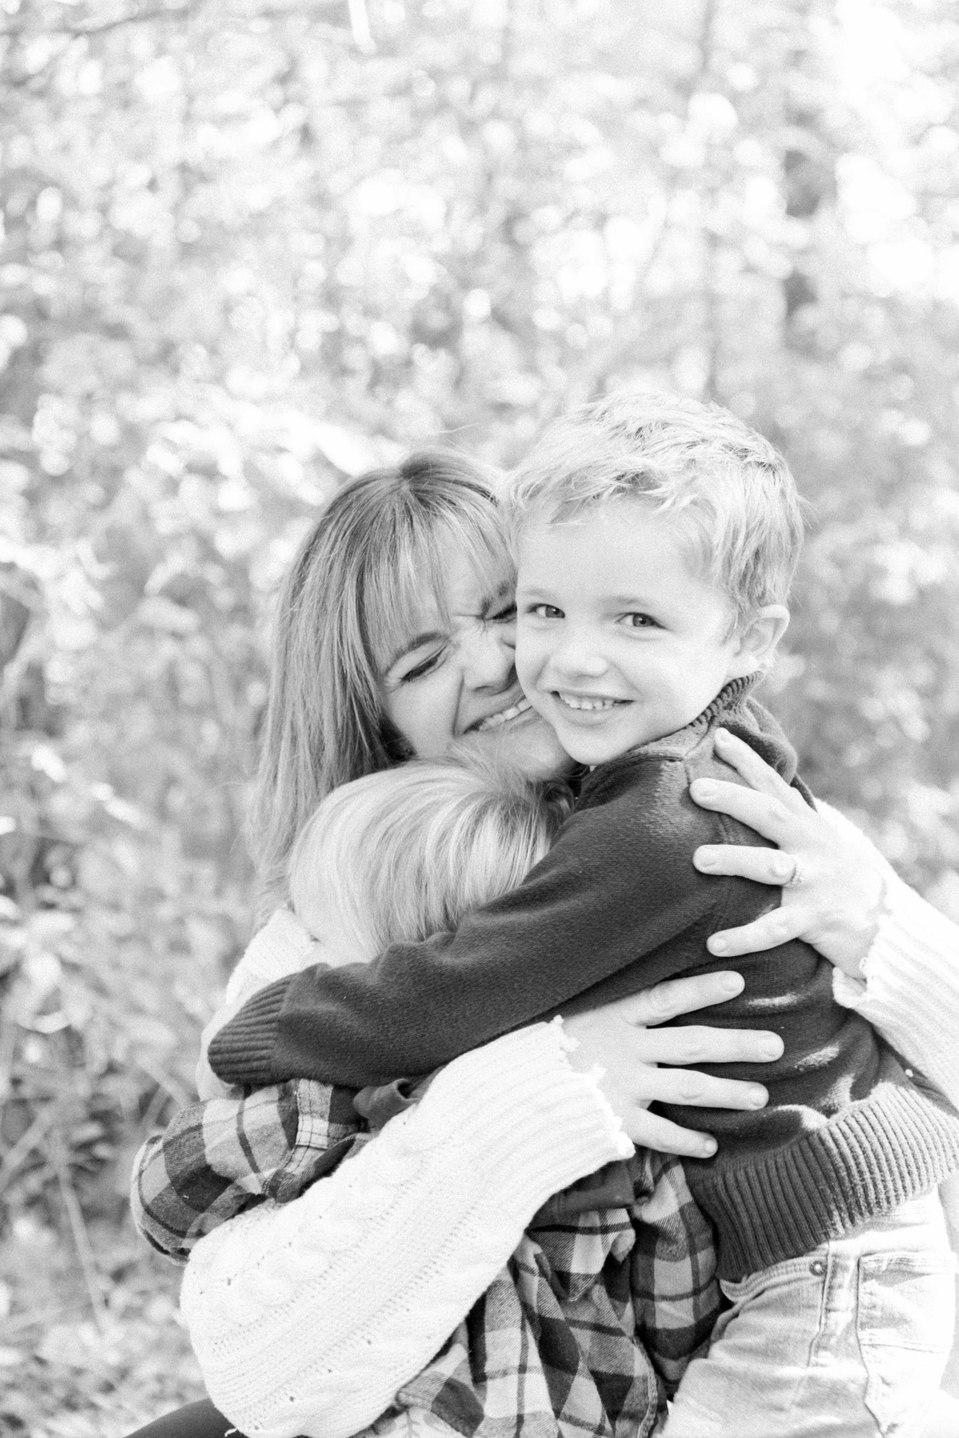 Black and white candid portrait of mother hugging two sons, Fall photos, Niagara family photographer, family photography, Niagara portrait photographer, portrait photography, Emily VanderBeek Photography.